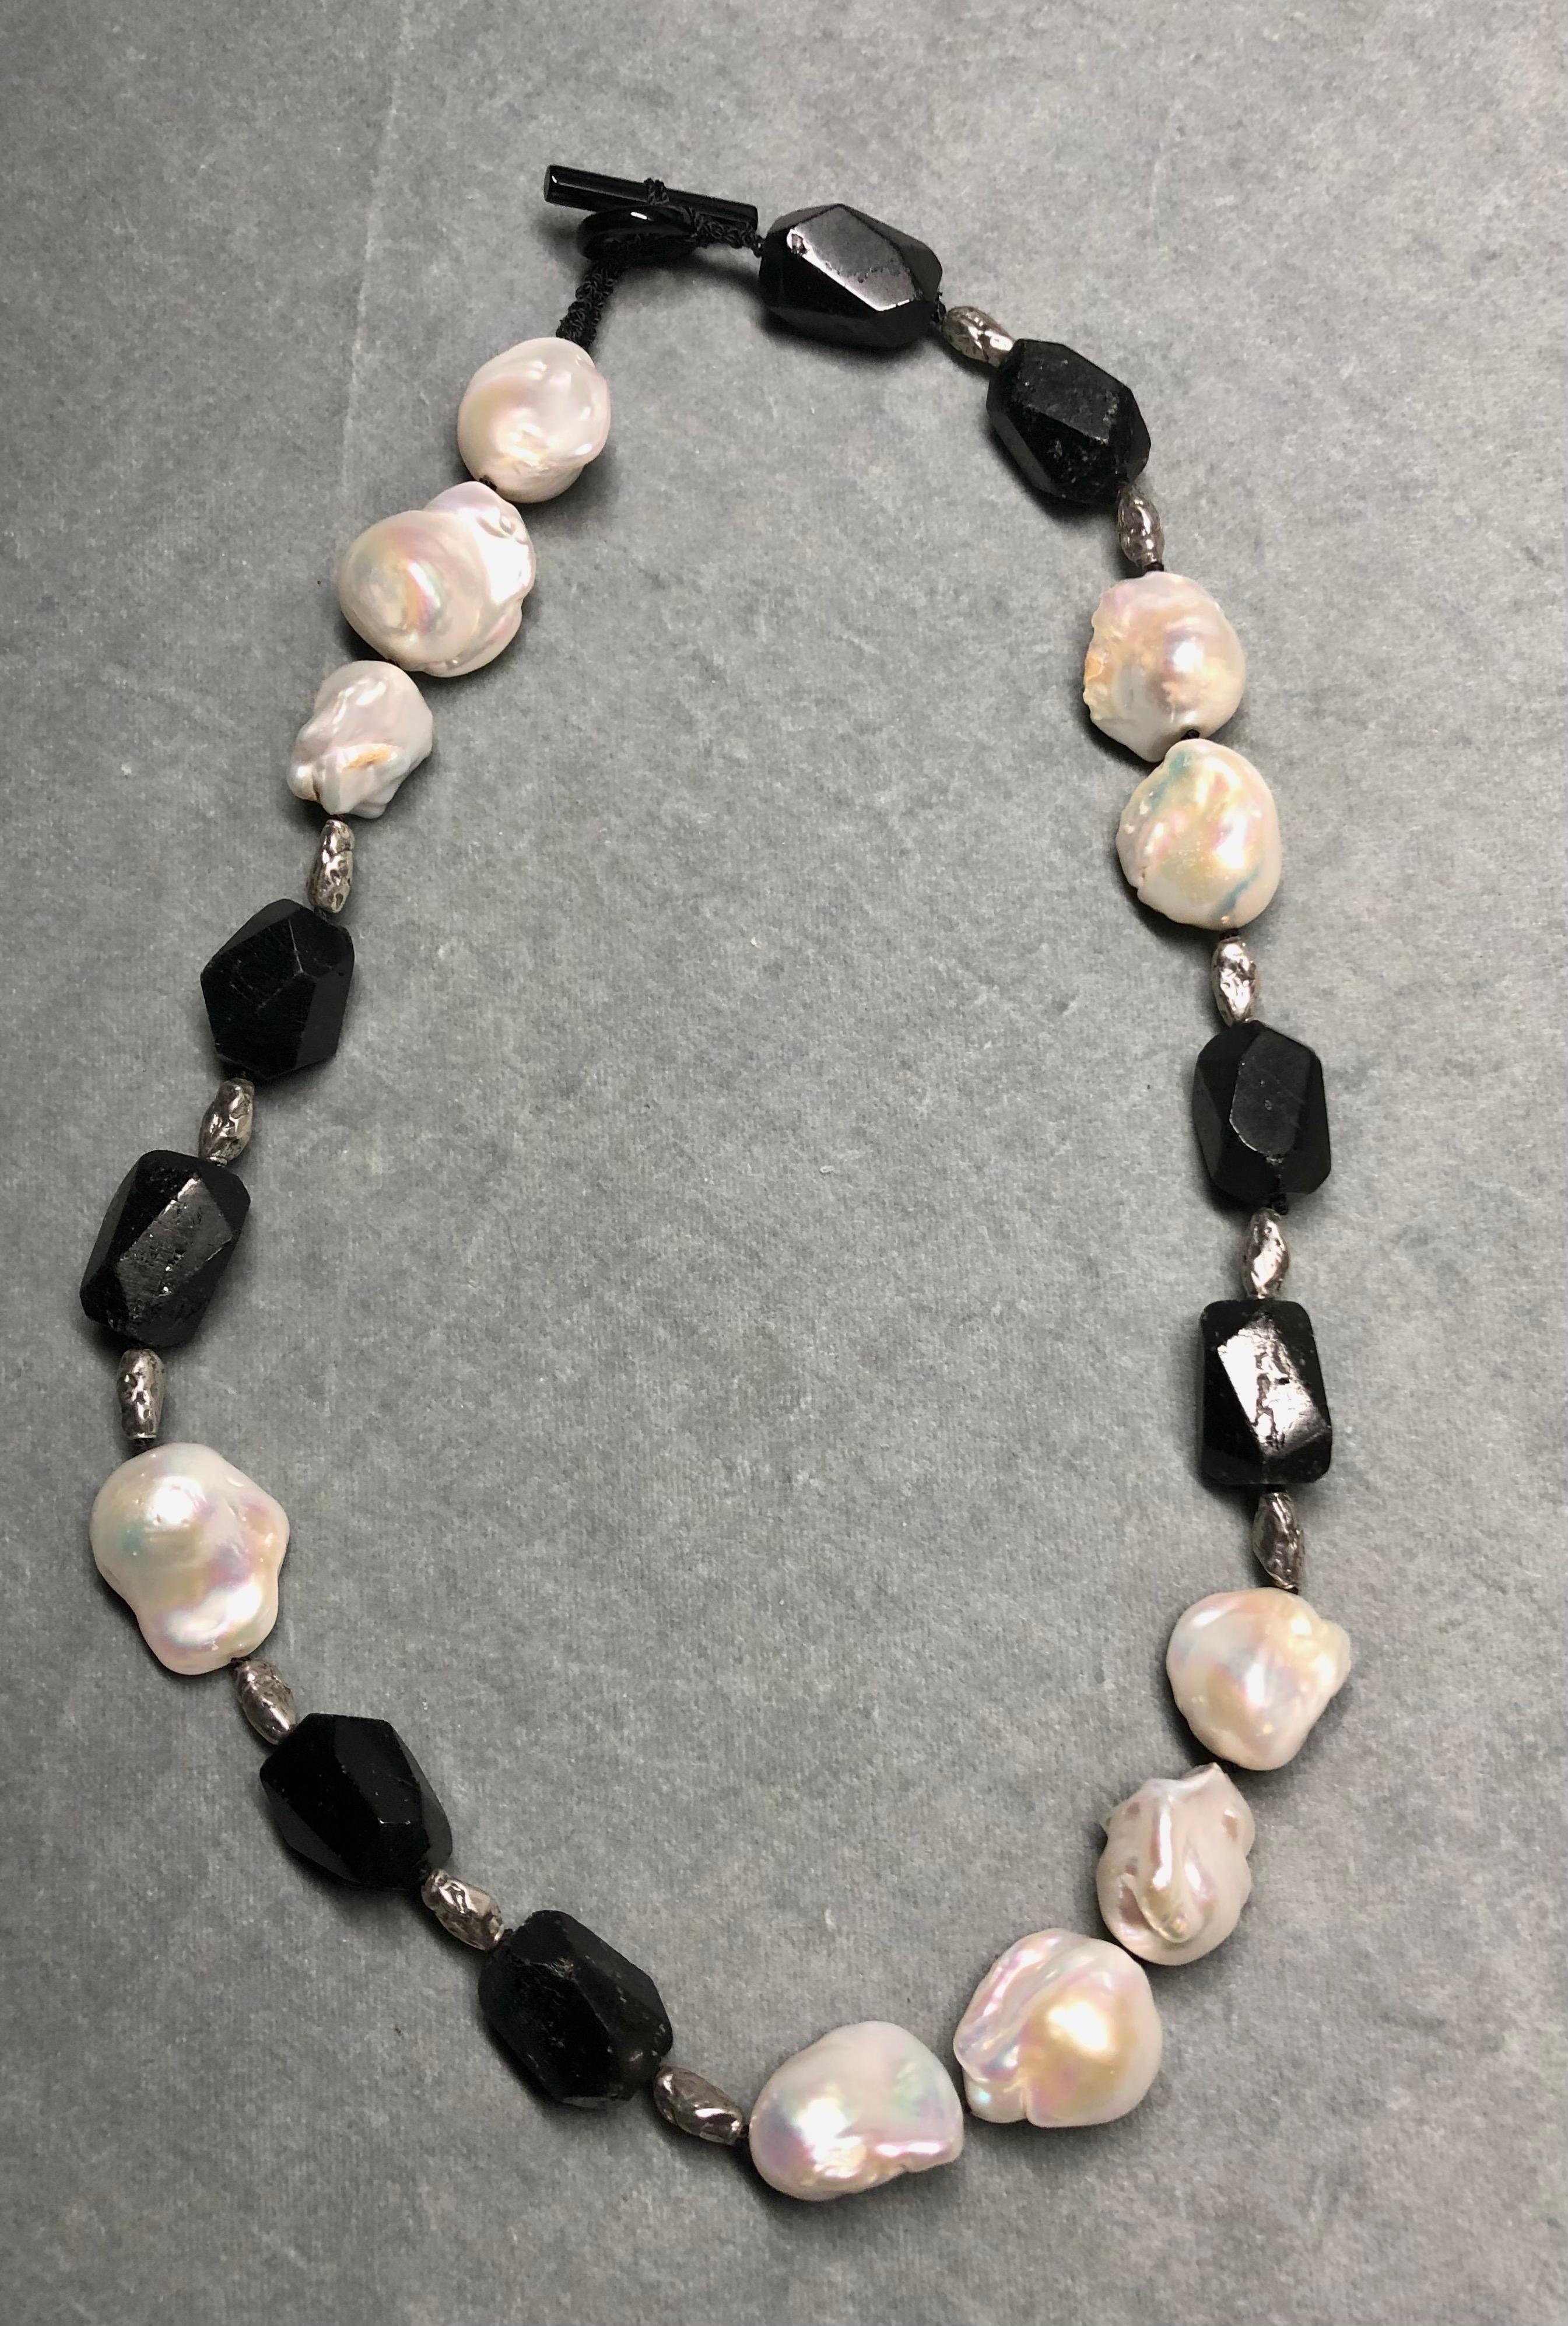 Single strand necklace. Large baroque white freshwater pearls, black tumbled tourmaline nugget beads. Interspersed with pure silver nugget beads. Finished with black onyx toggle clasp. 